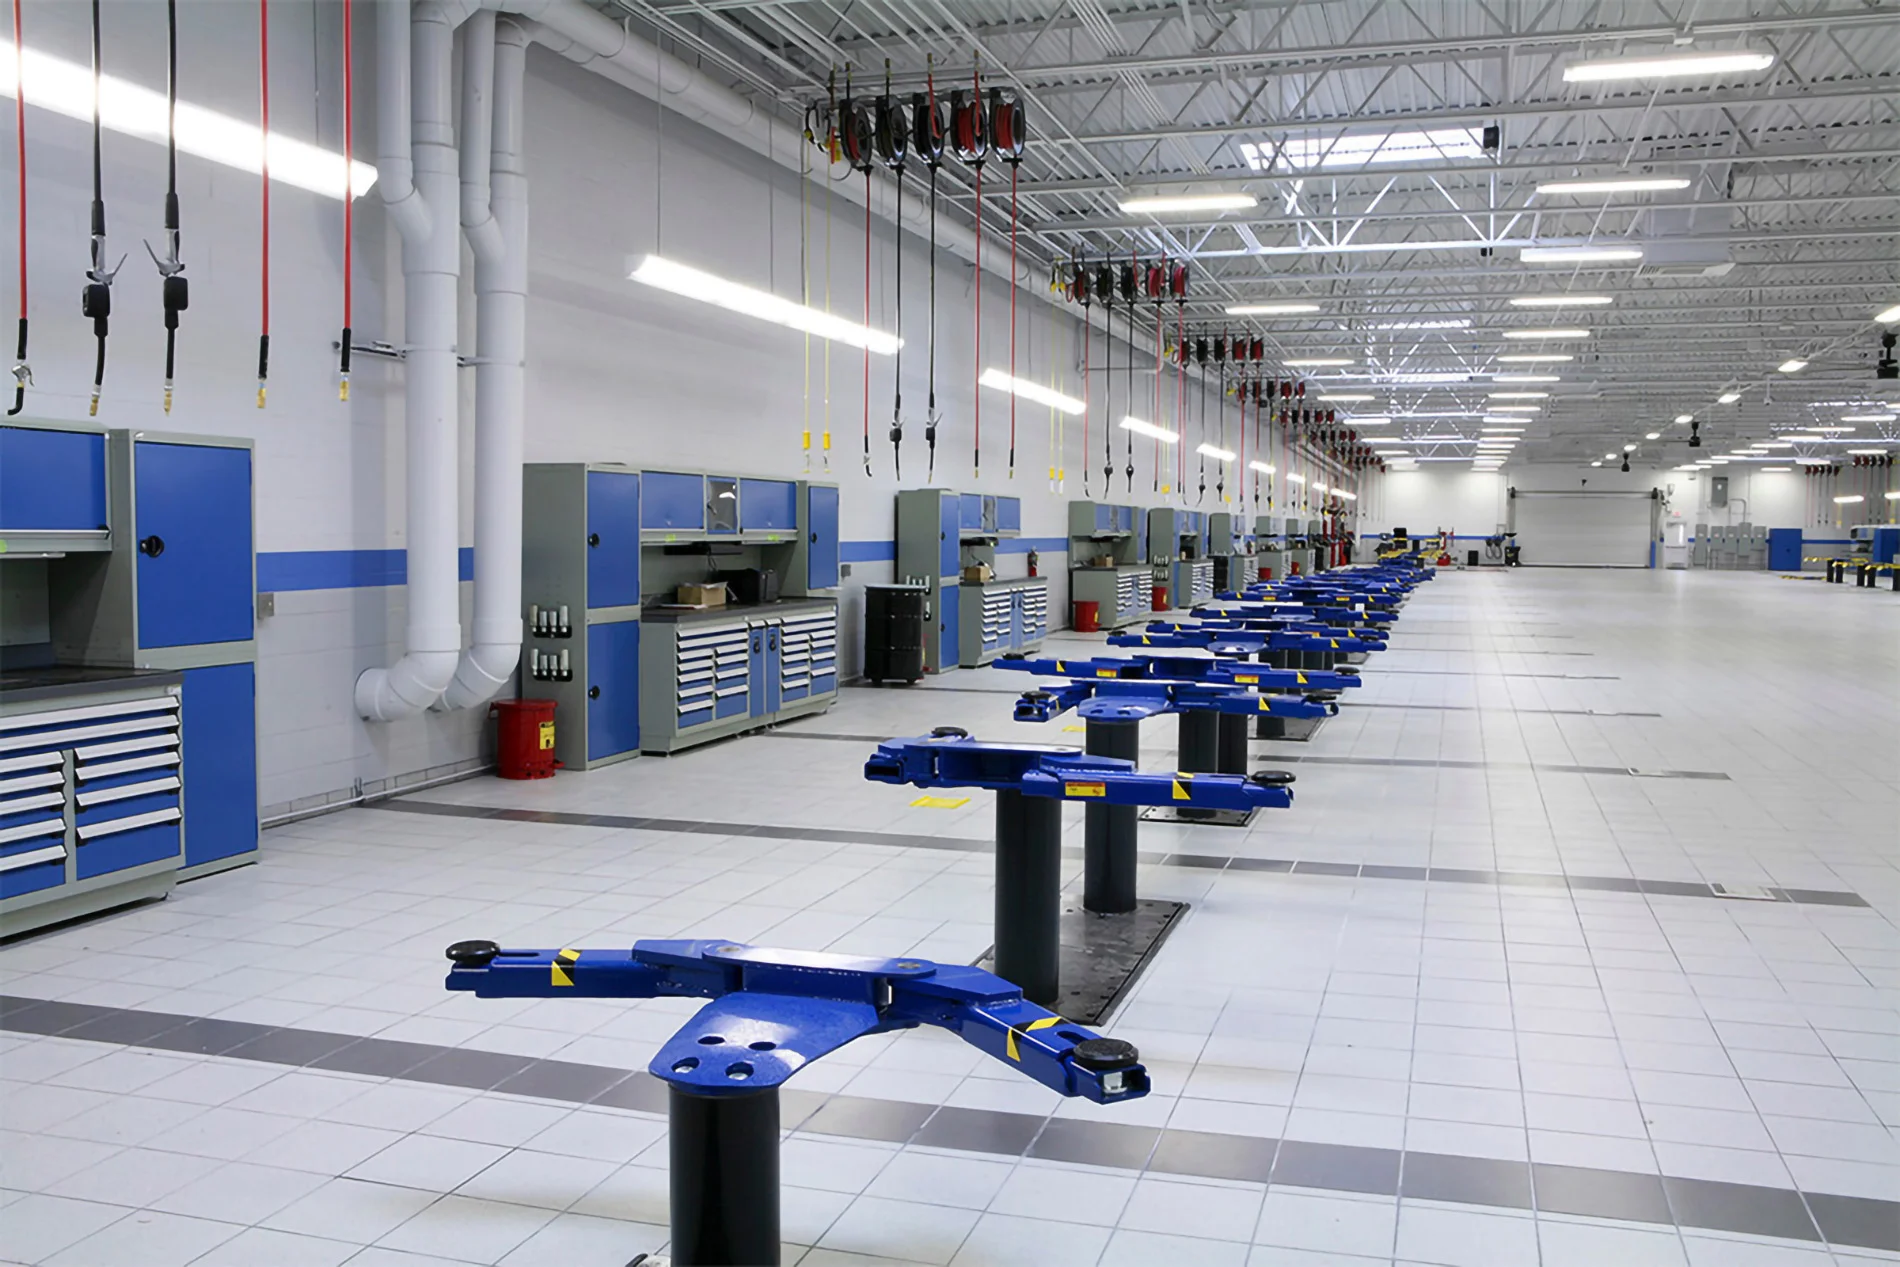 An automotive service center with multiple vehicle lifts, tool cabinets, and overhead pneumatic hoses